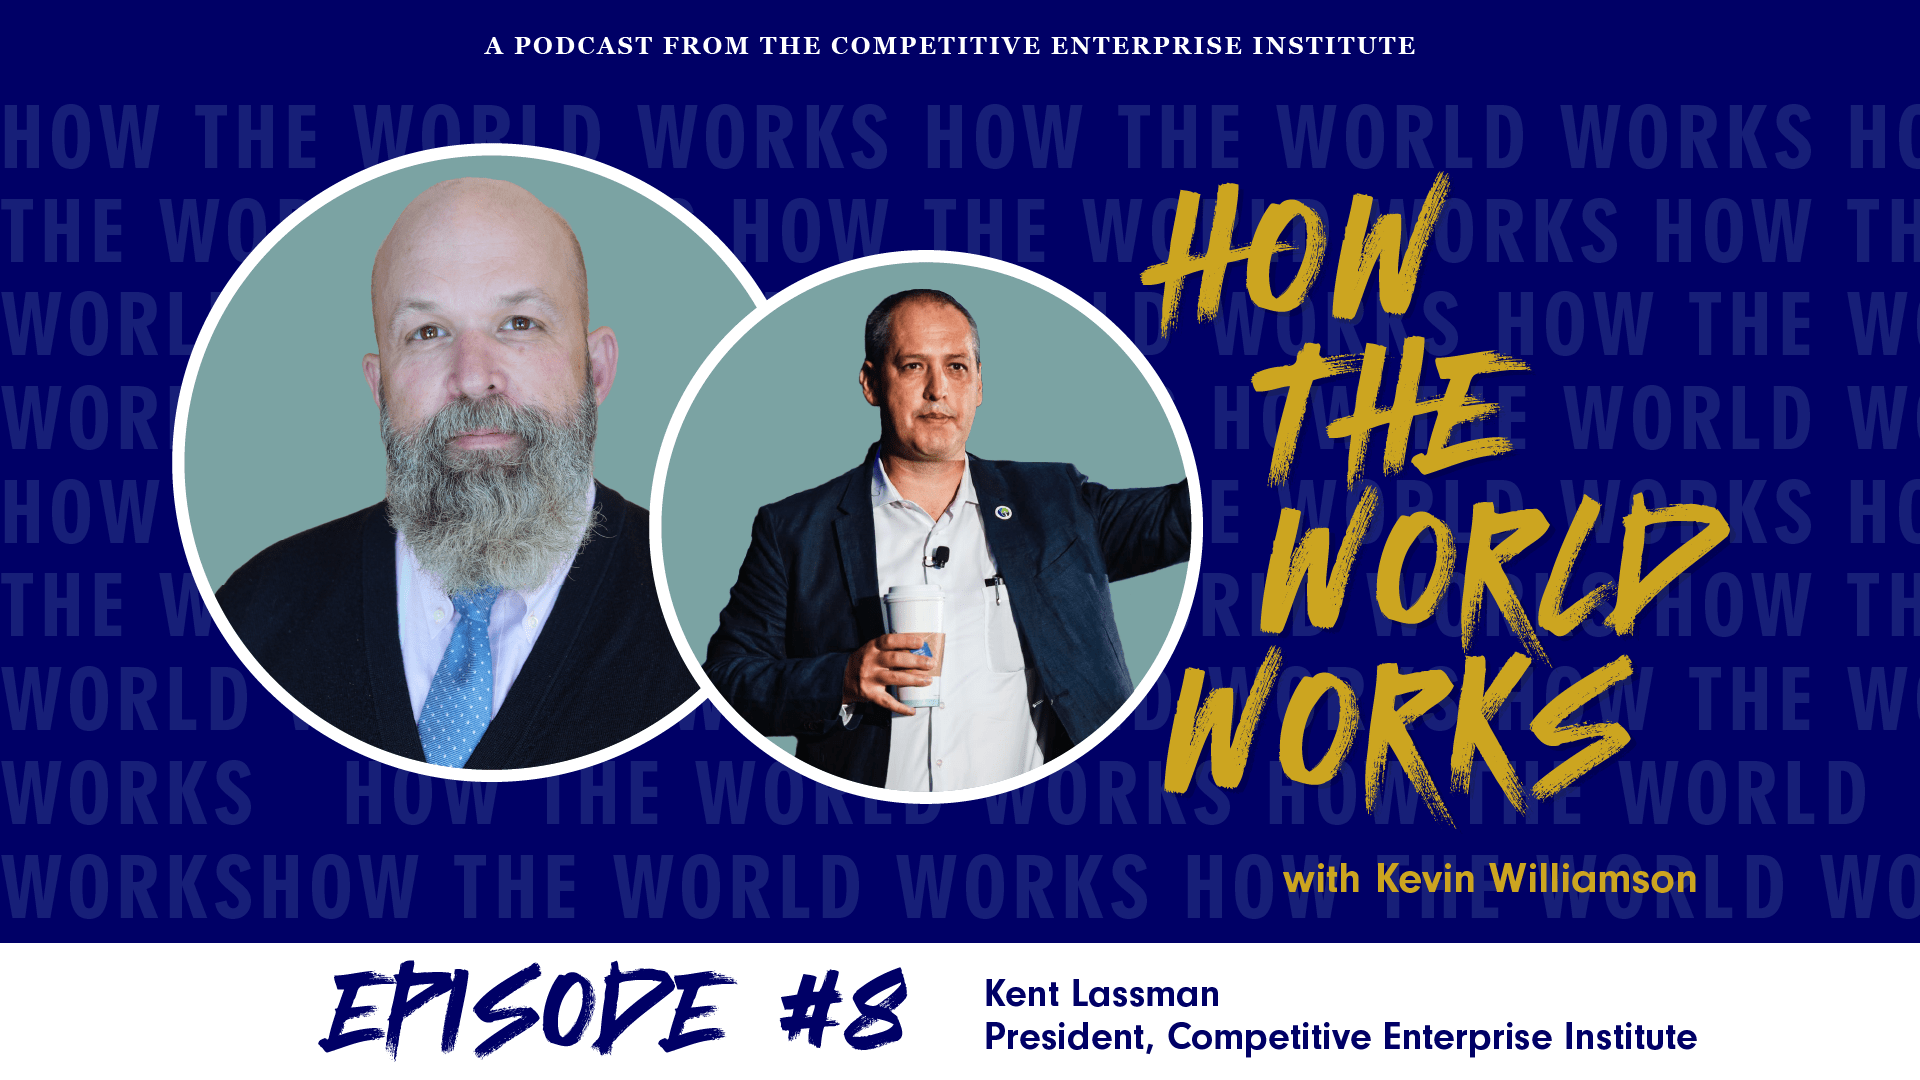 How the World Works Podcast with Kent Lassman